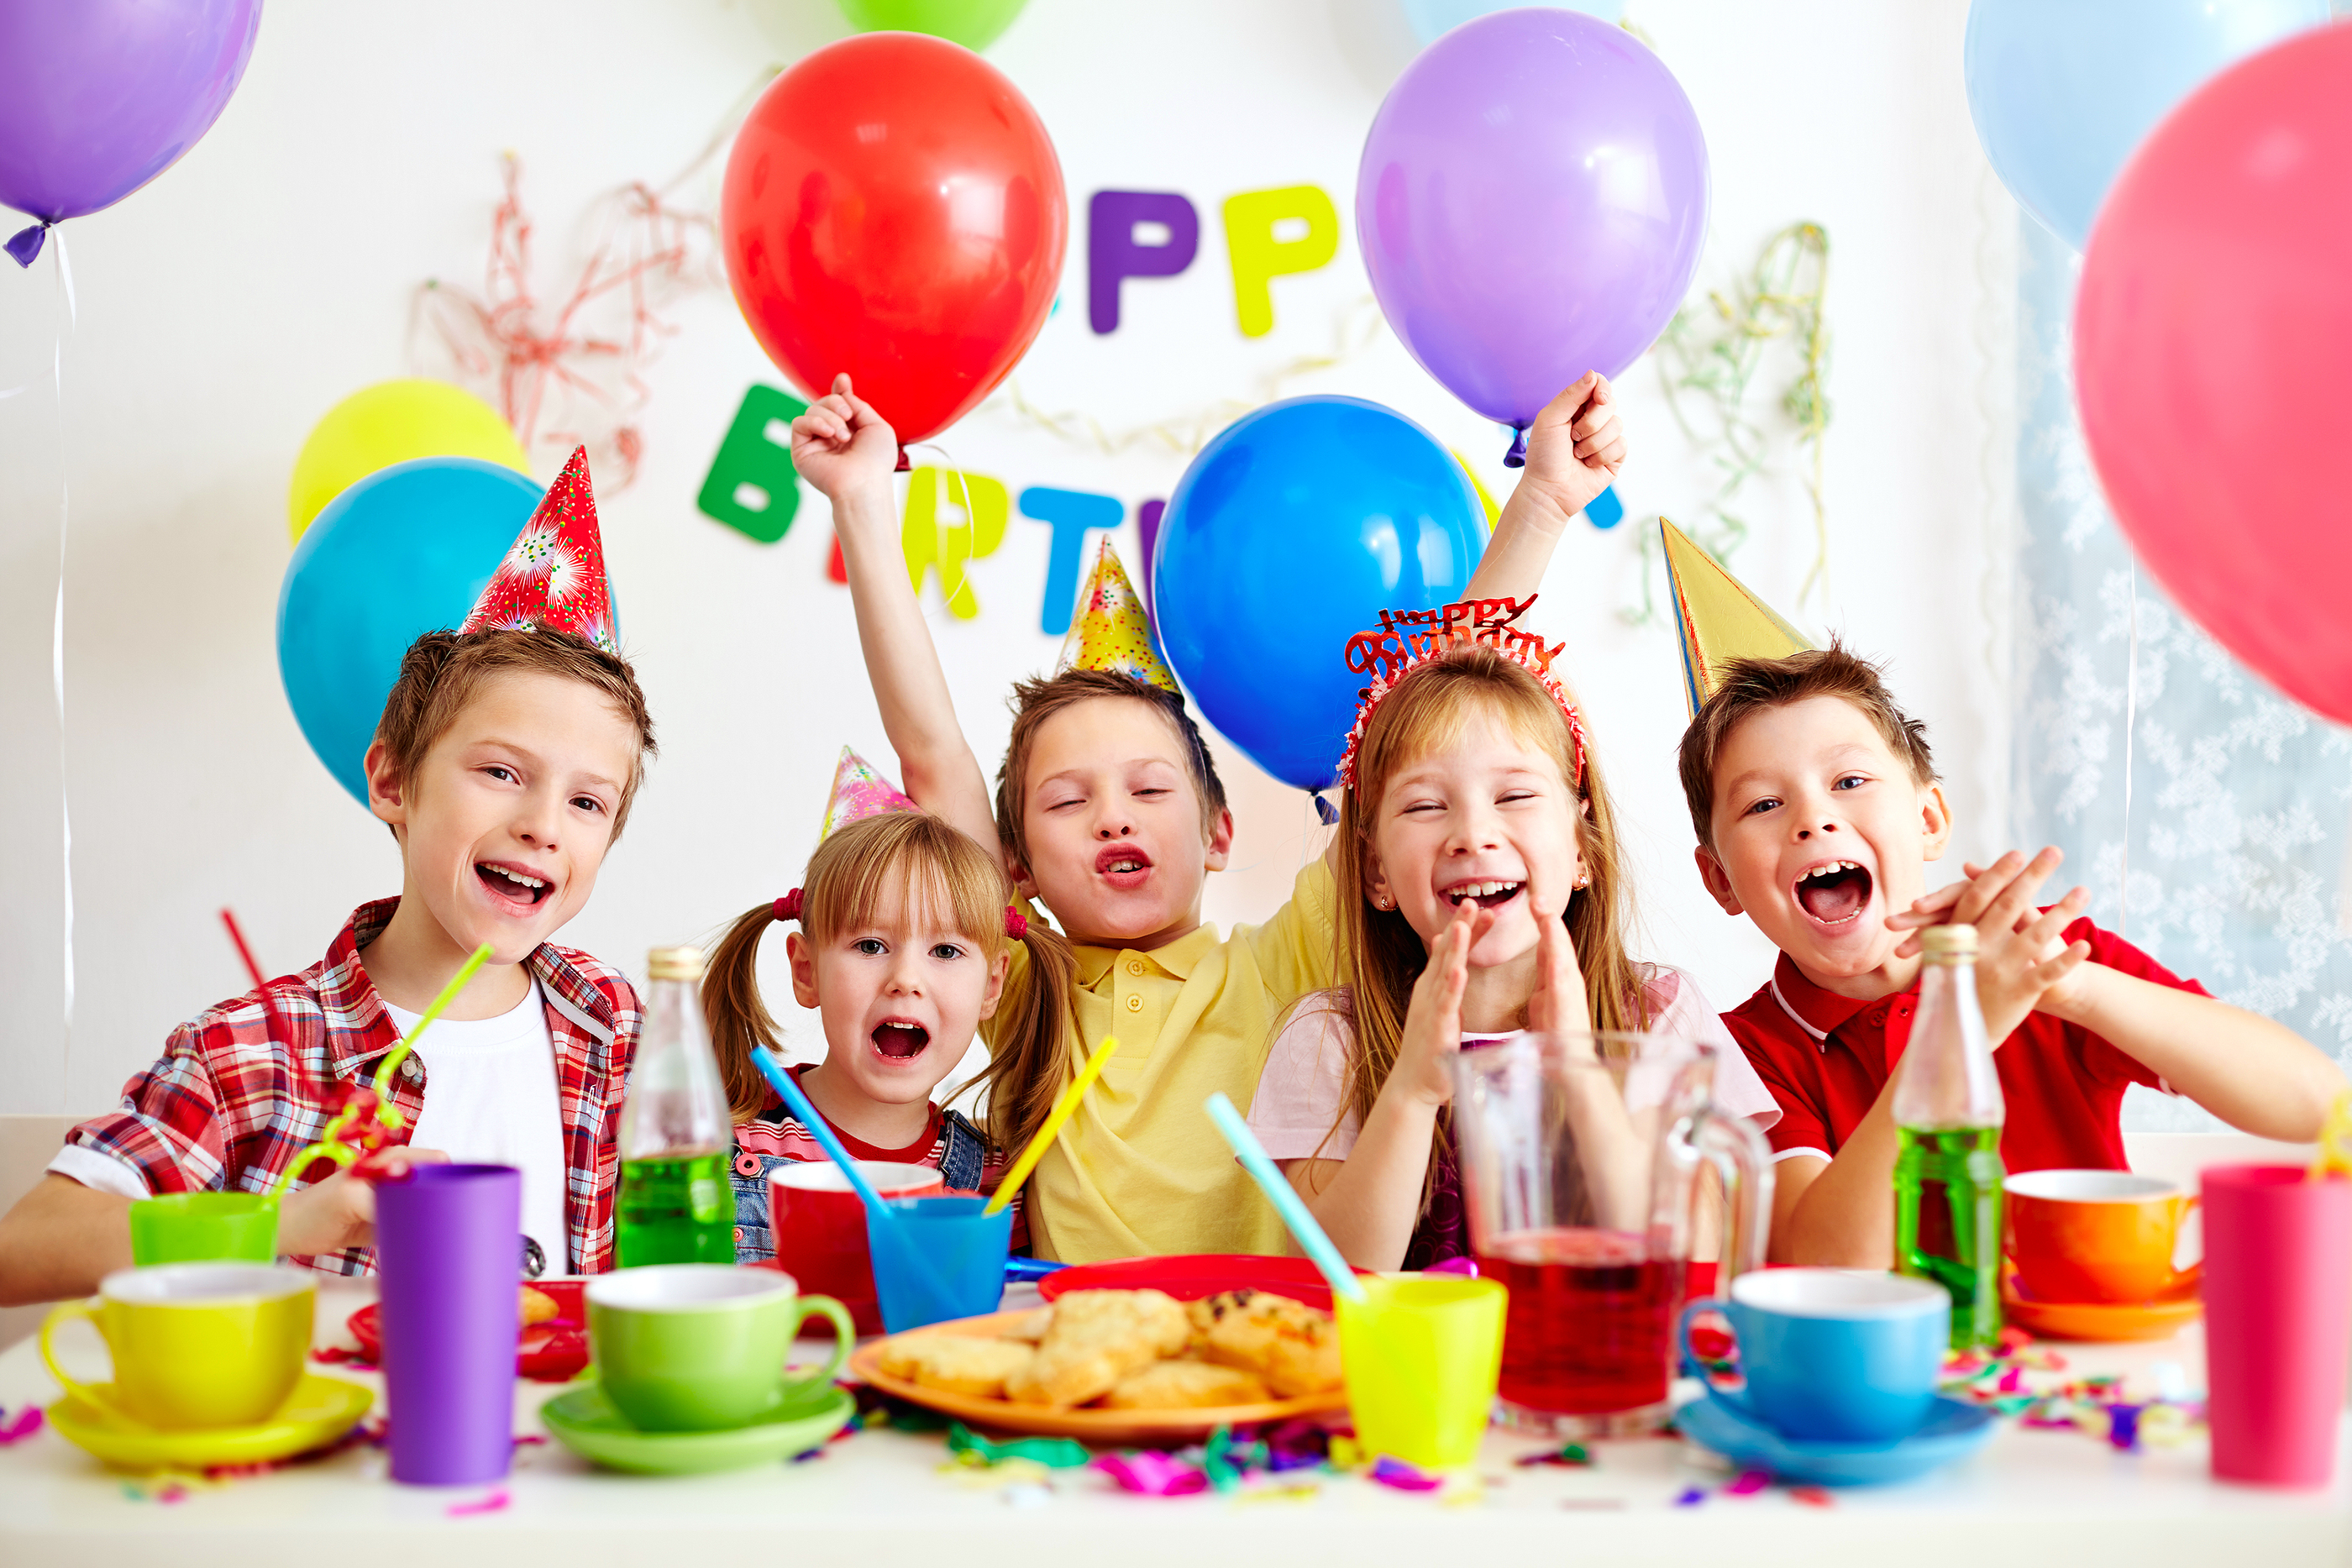 BirtHDay Party HD Background Wallpaper